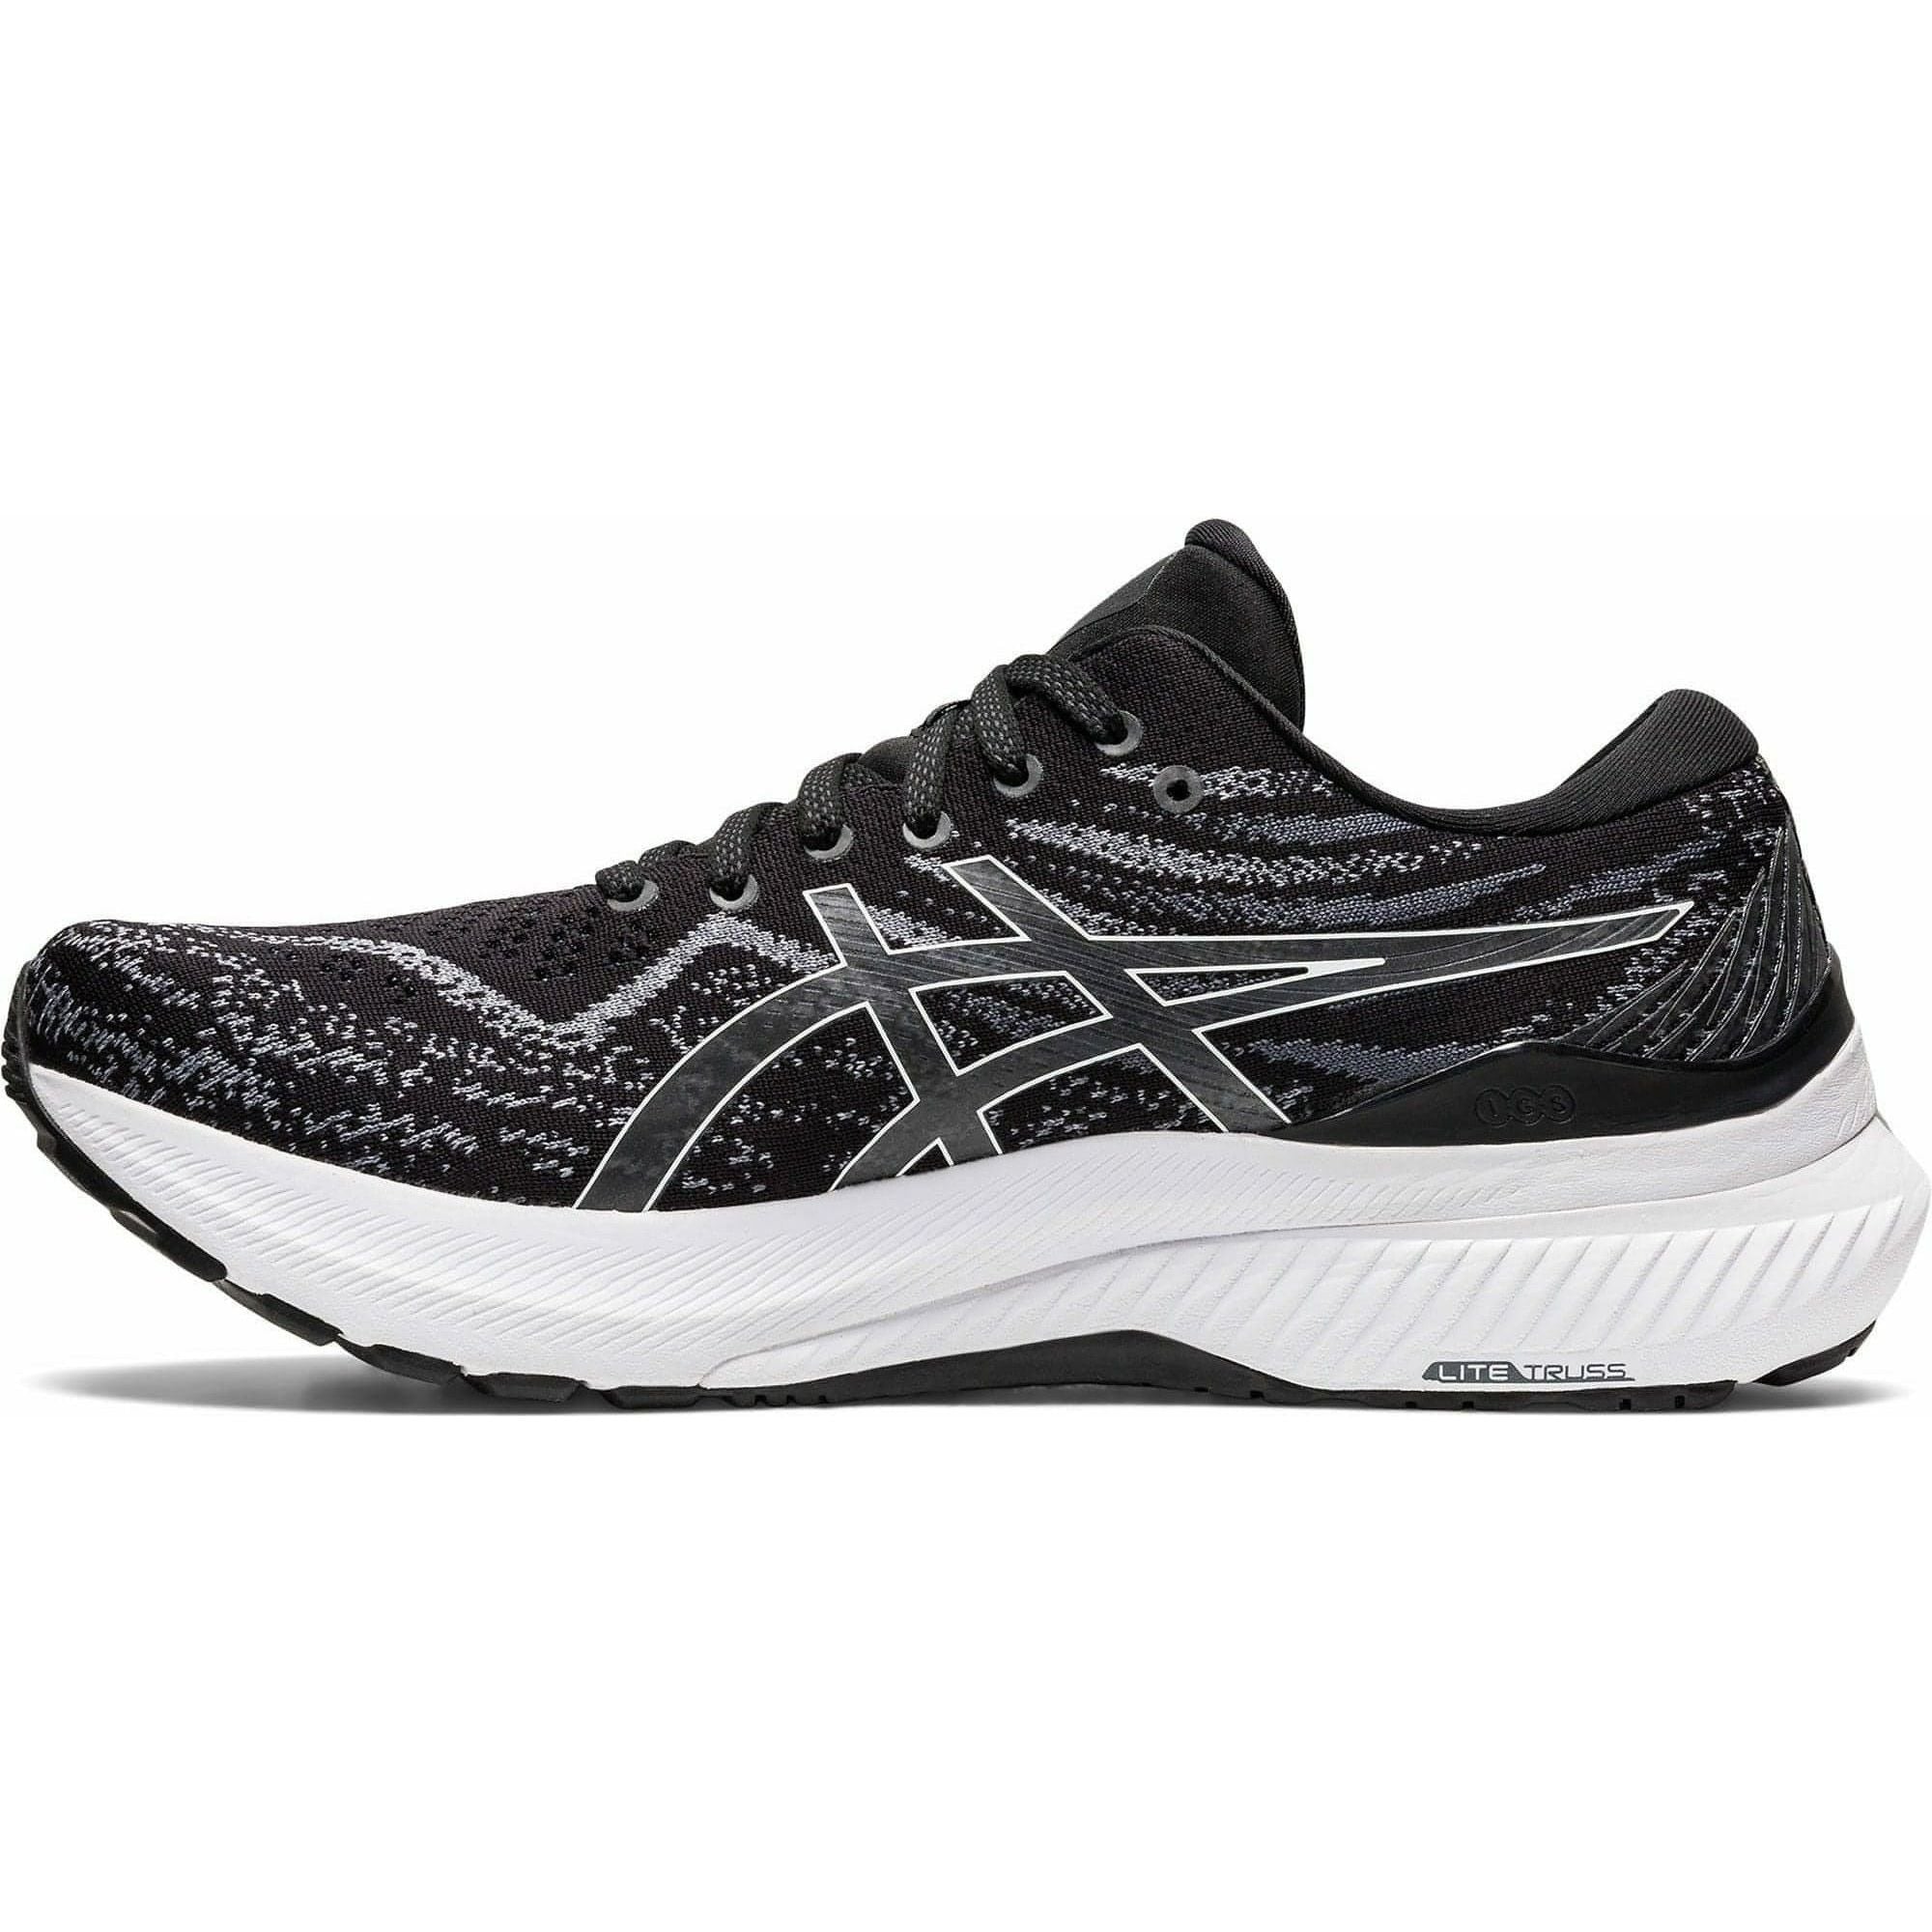 Asics Gel Kayano 29 WIDE FIT (2E) Mens Running Shoes - Black